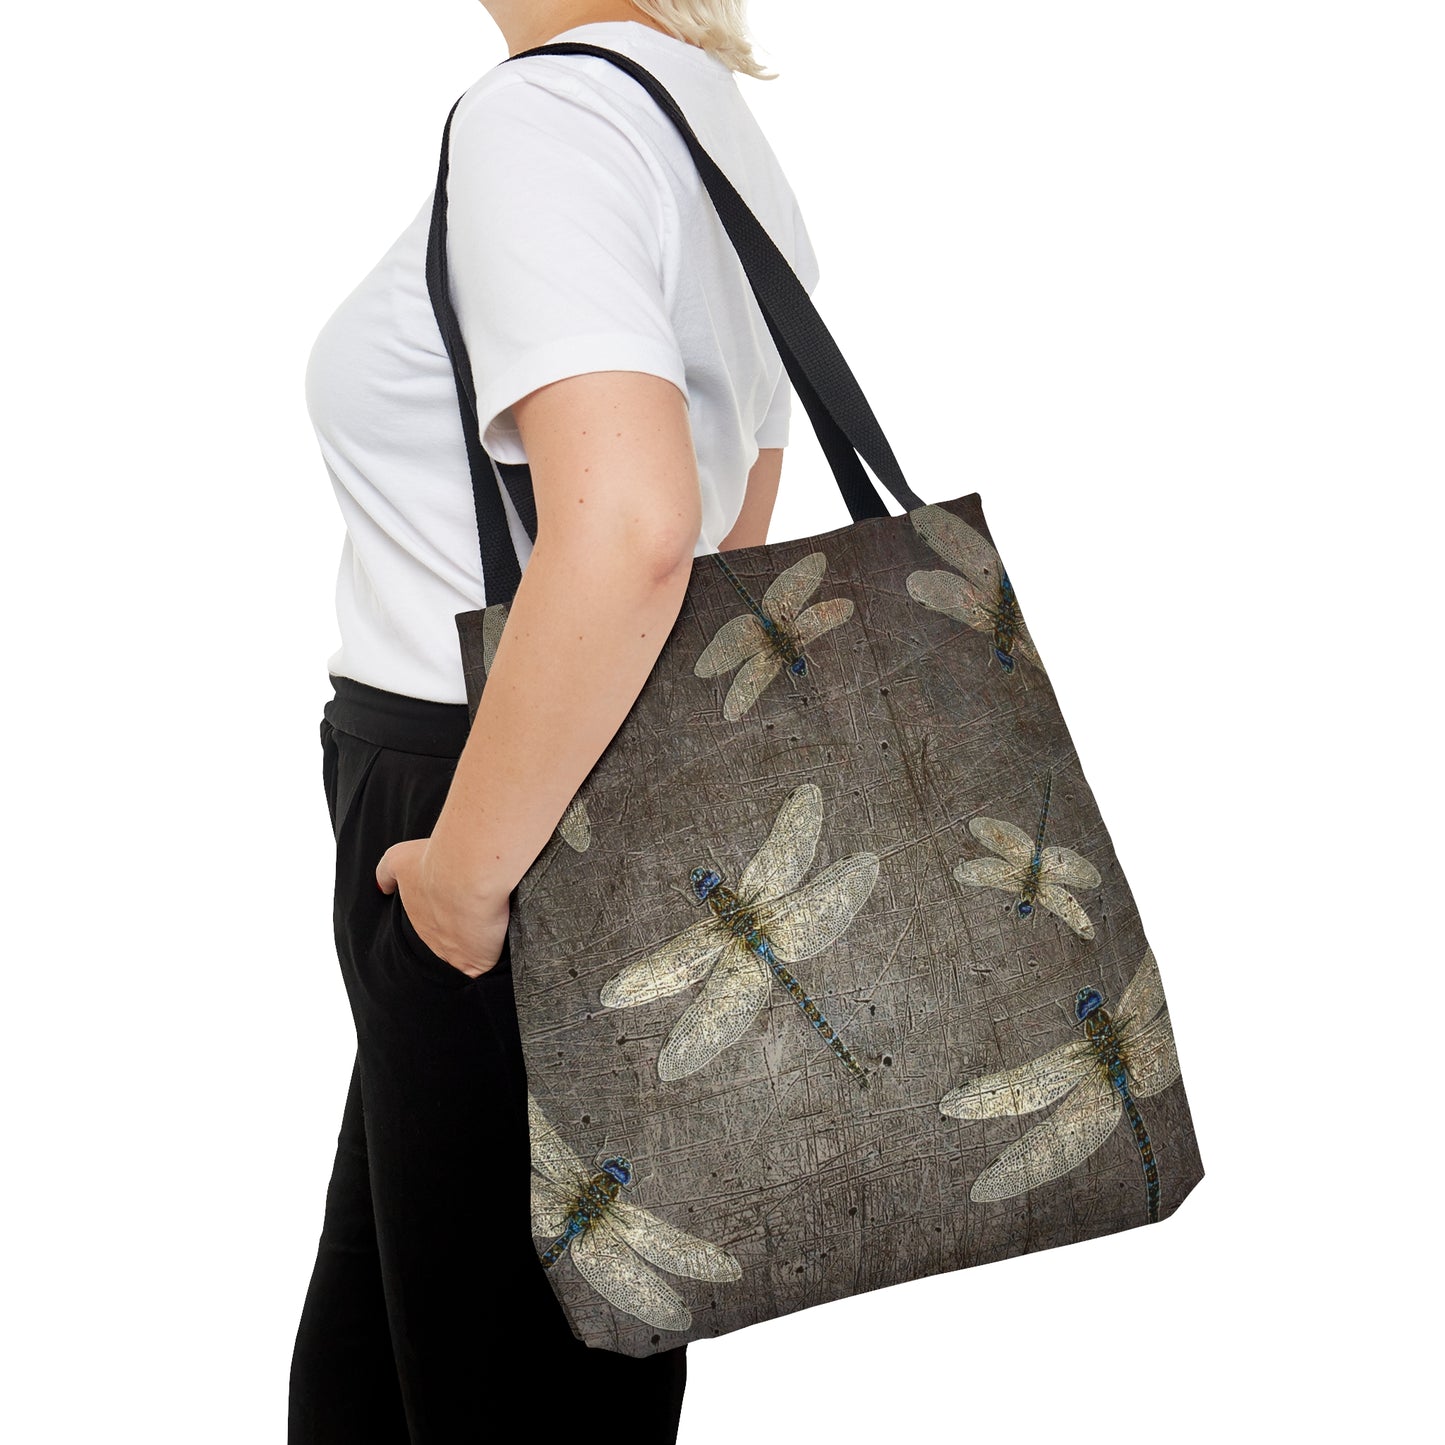 Flight of Dragonflies on Distressed Gray Stone Printed on Tote Bag large carried